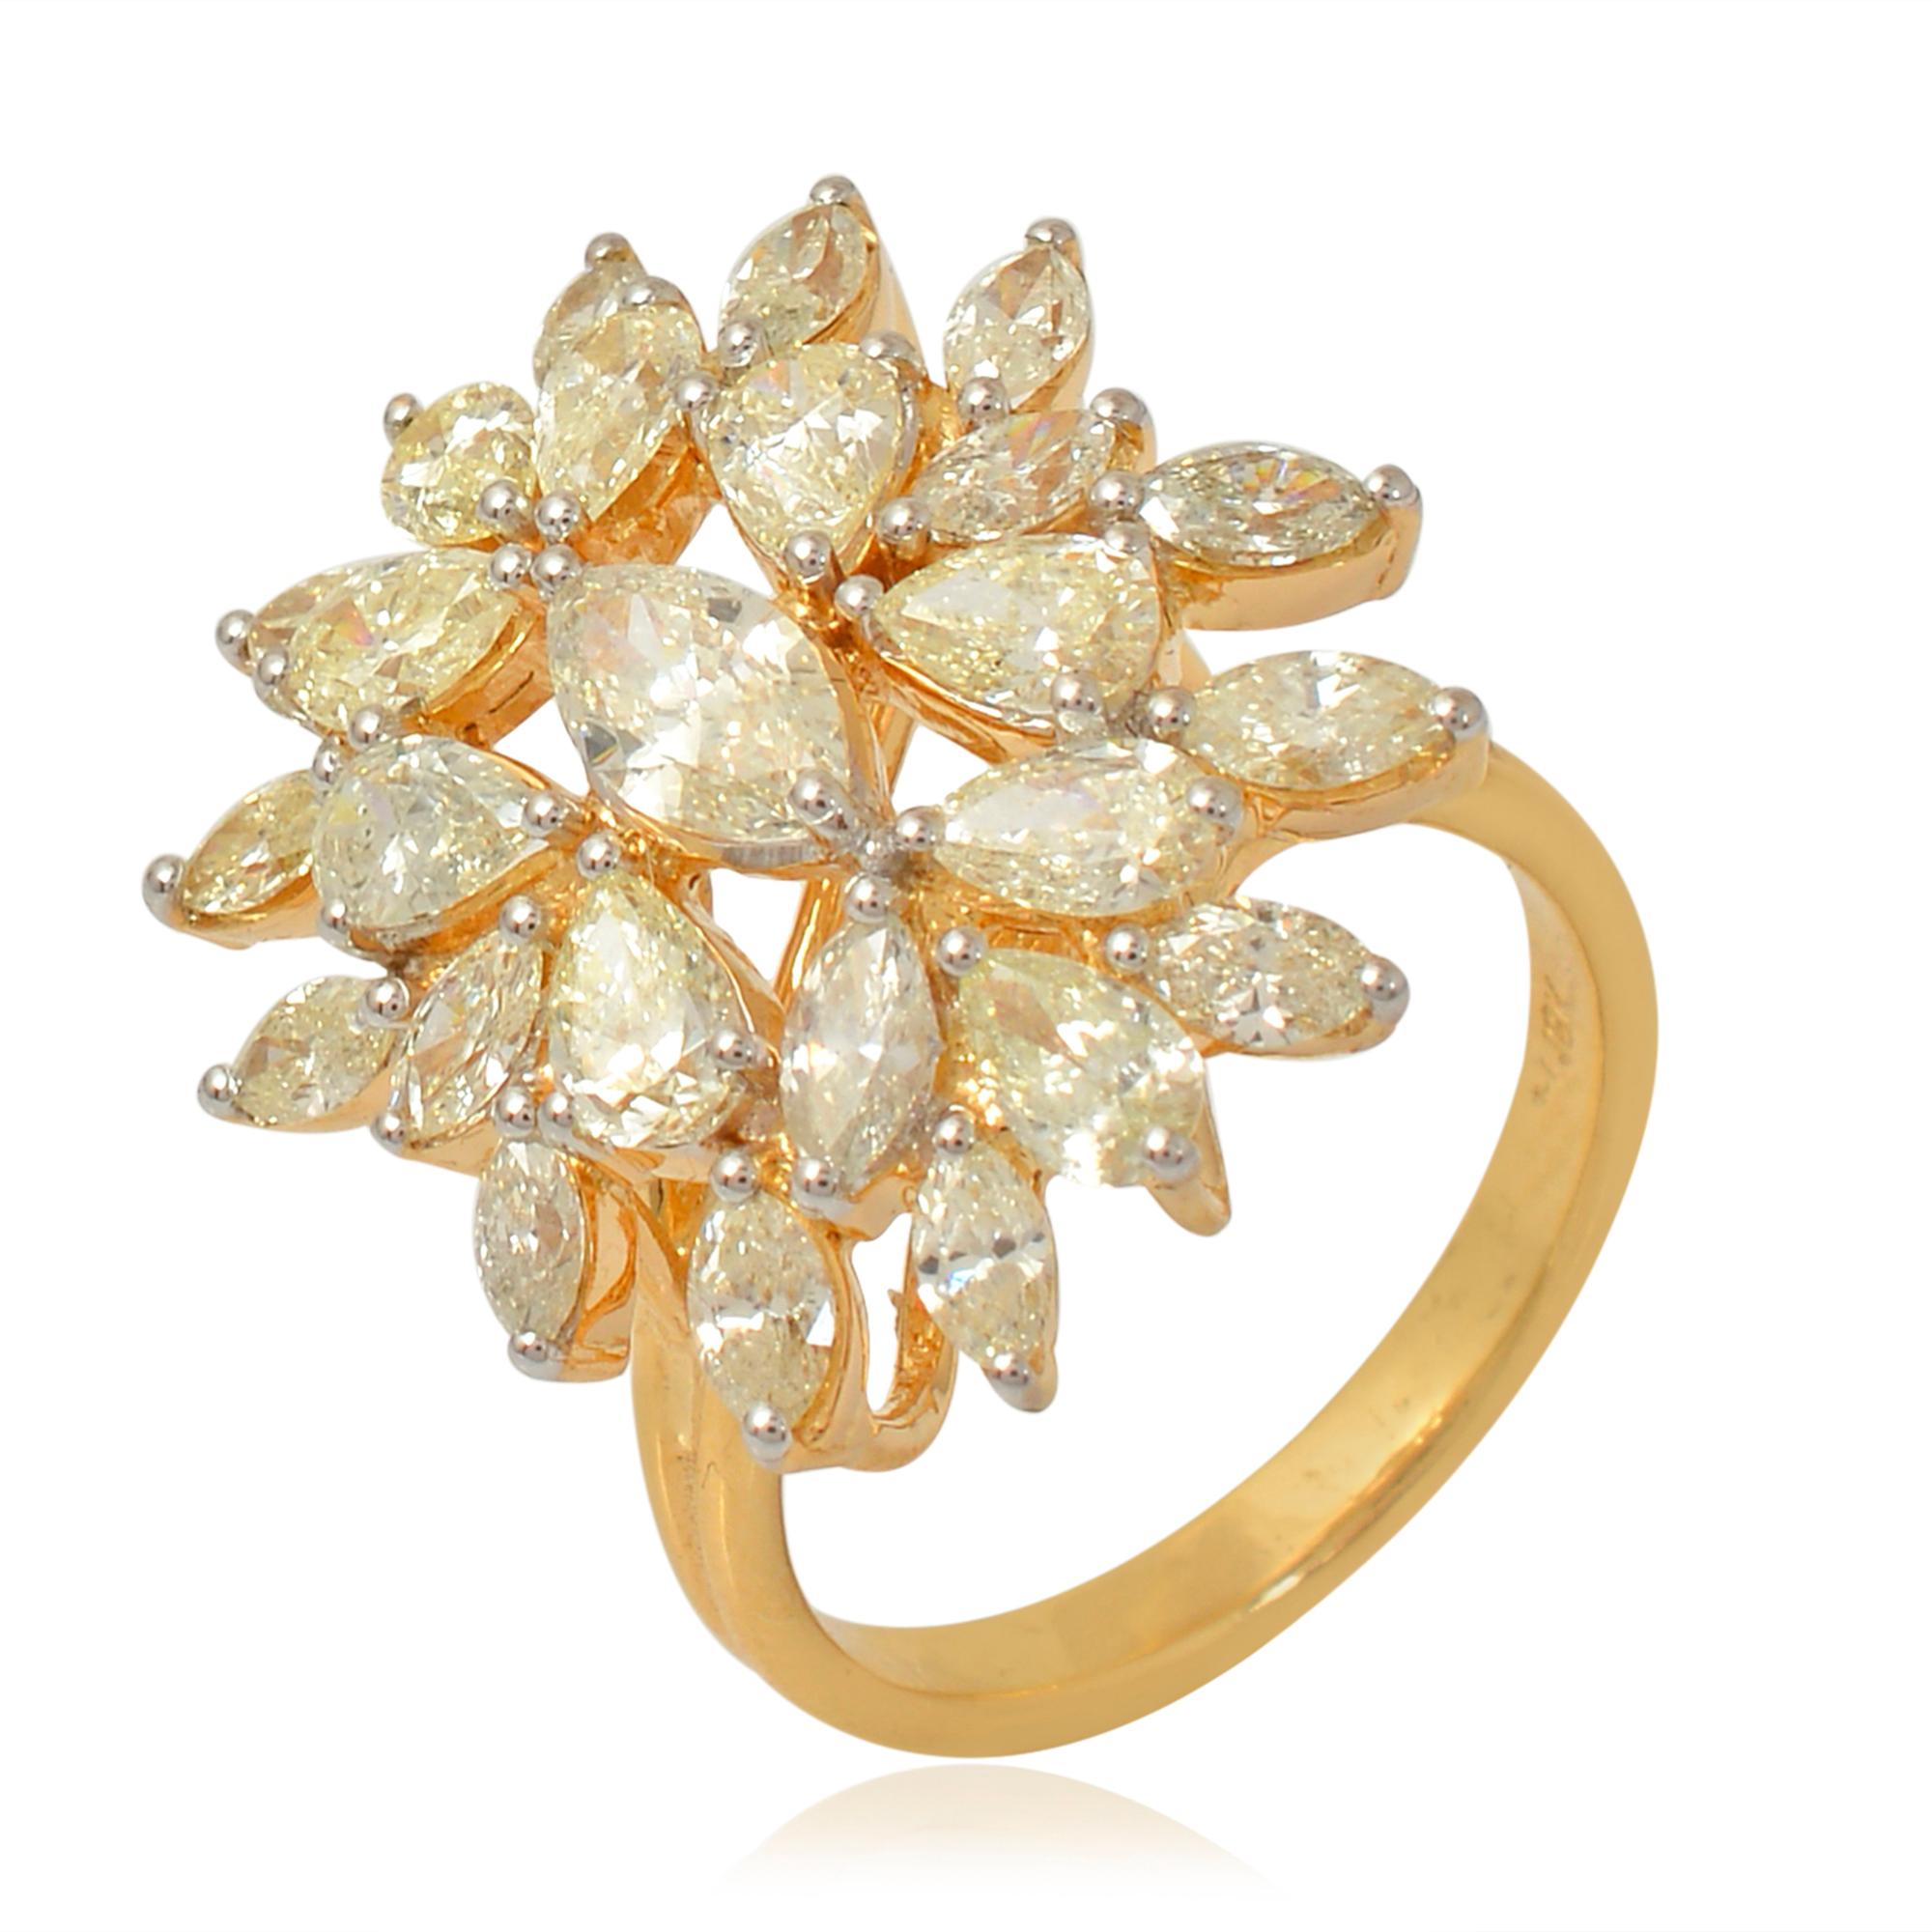 Women's 3.50 Carat Pear & Marquise Diamond Cocktail Ring 18 Karat Yellow Gold Jewelry For Sale